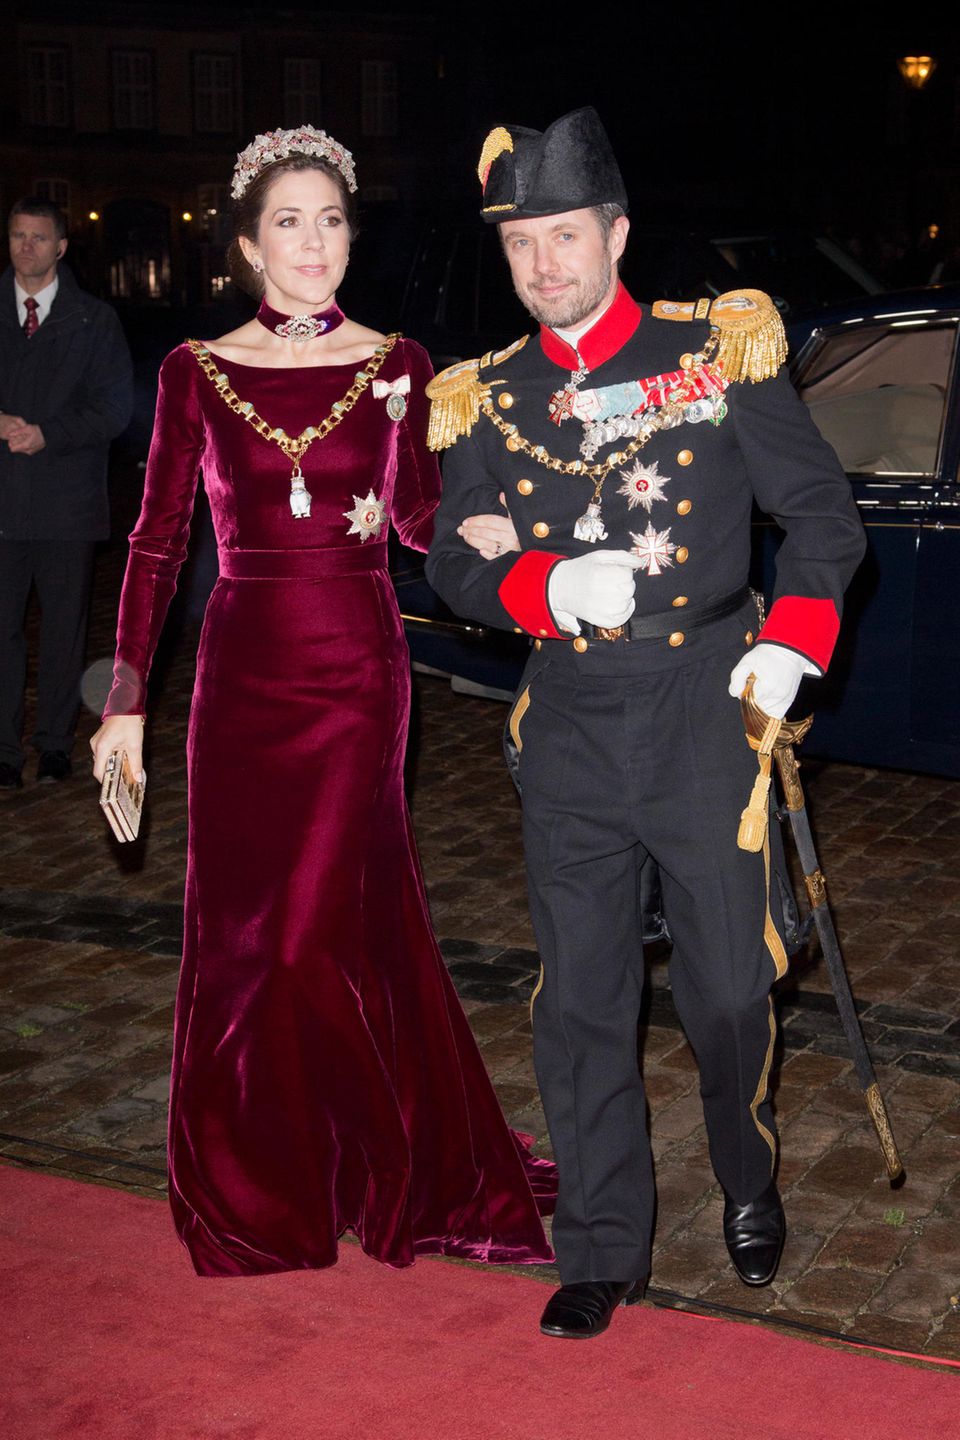 Crown Princess Mary at the New Year's Gala in Copenhagen, 2014